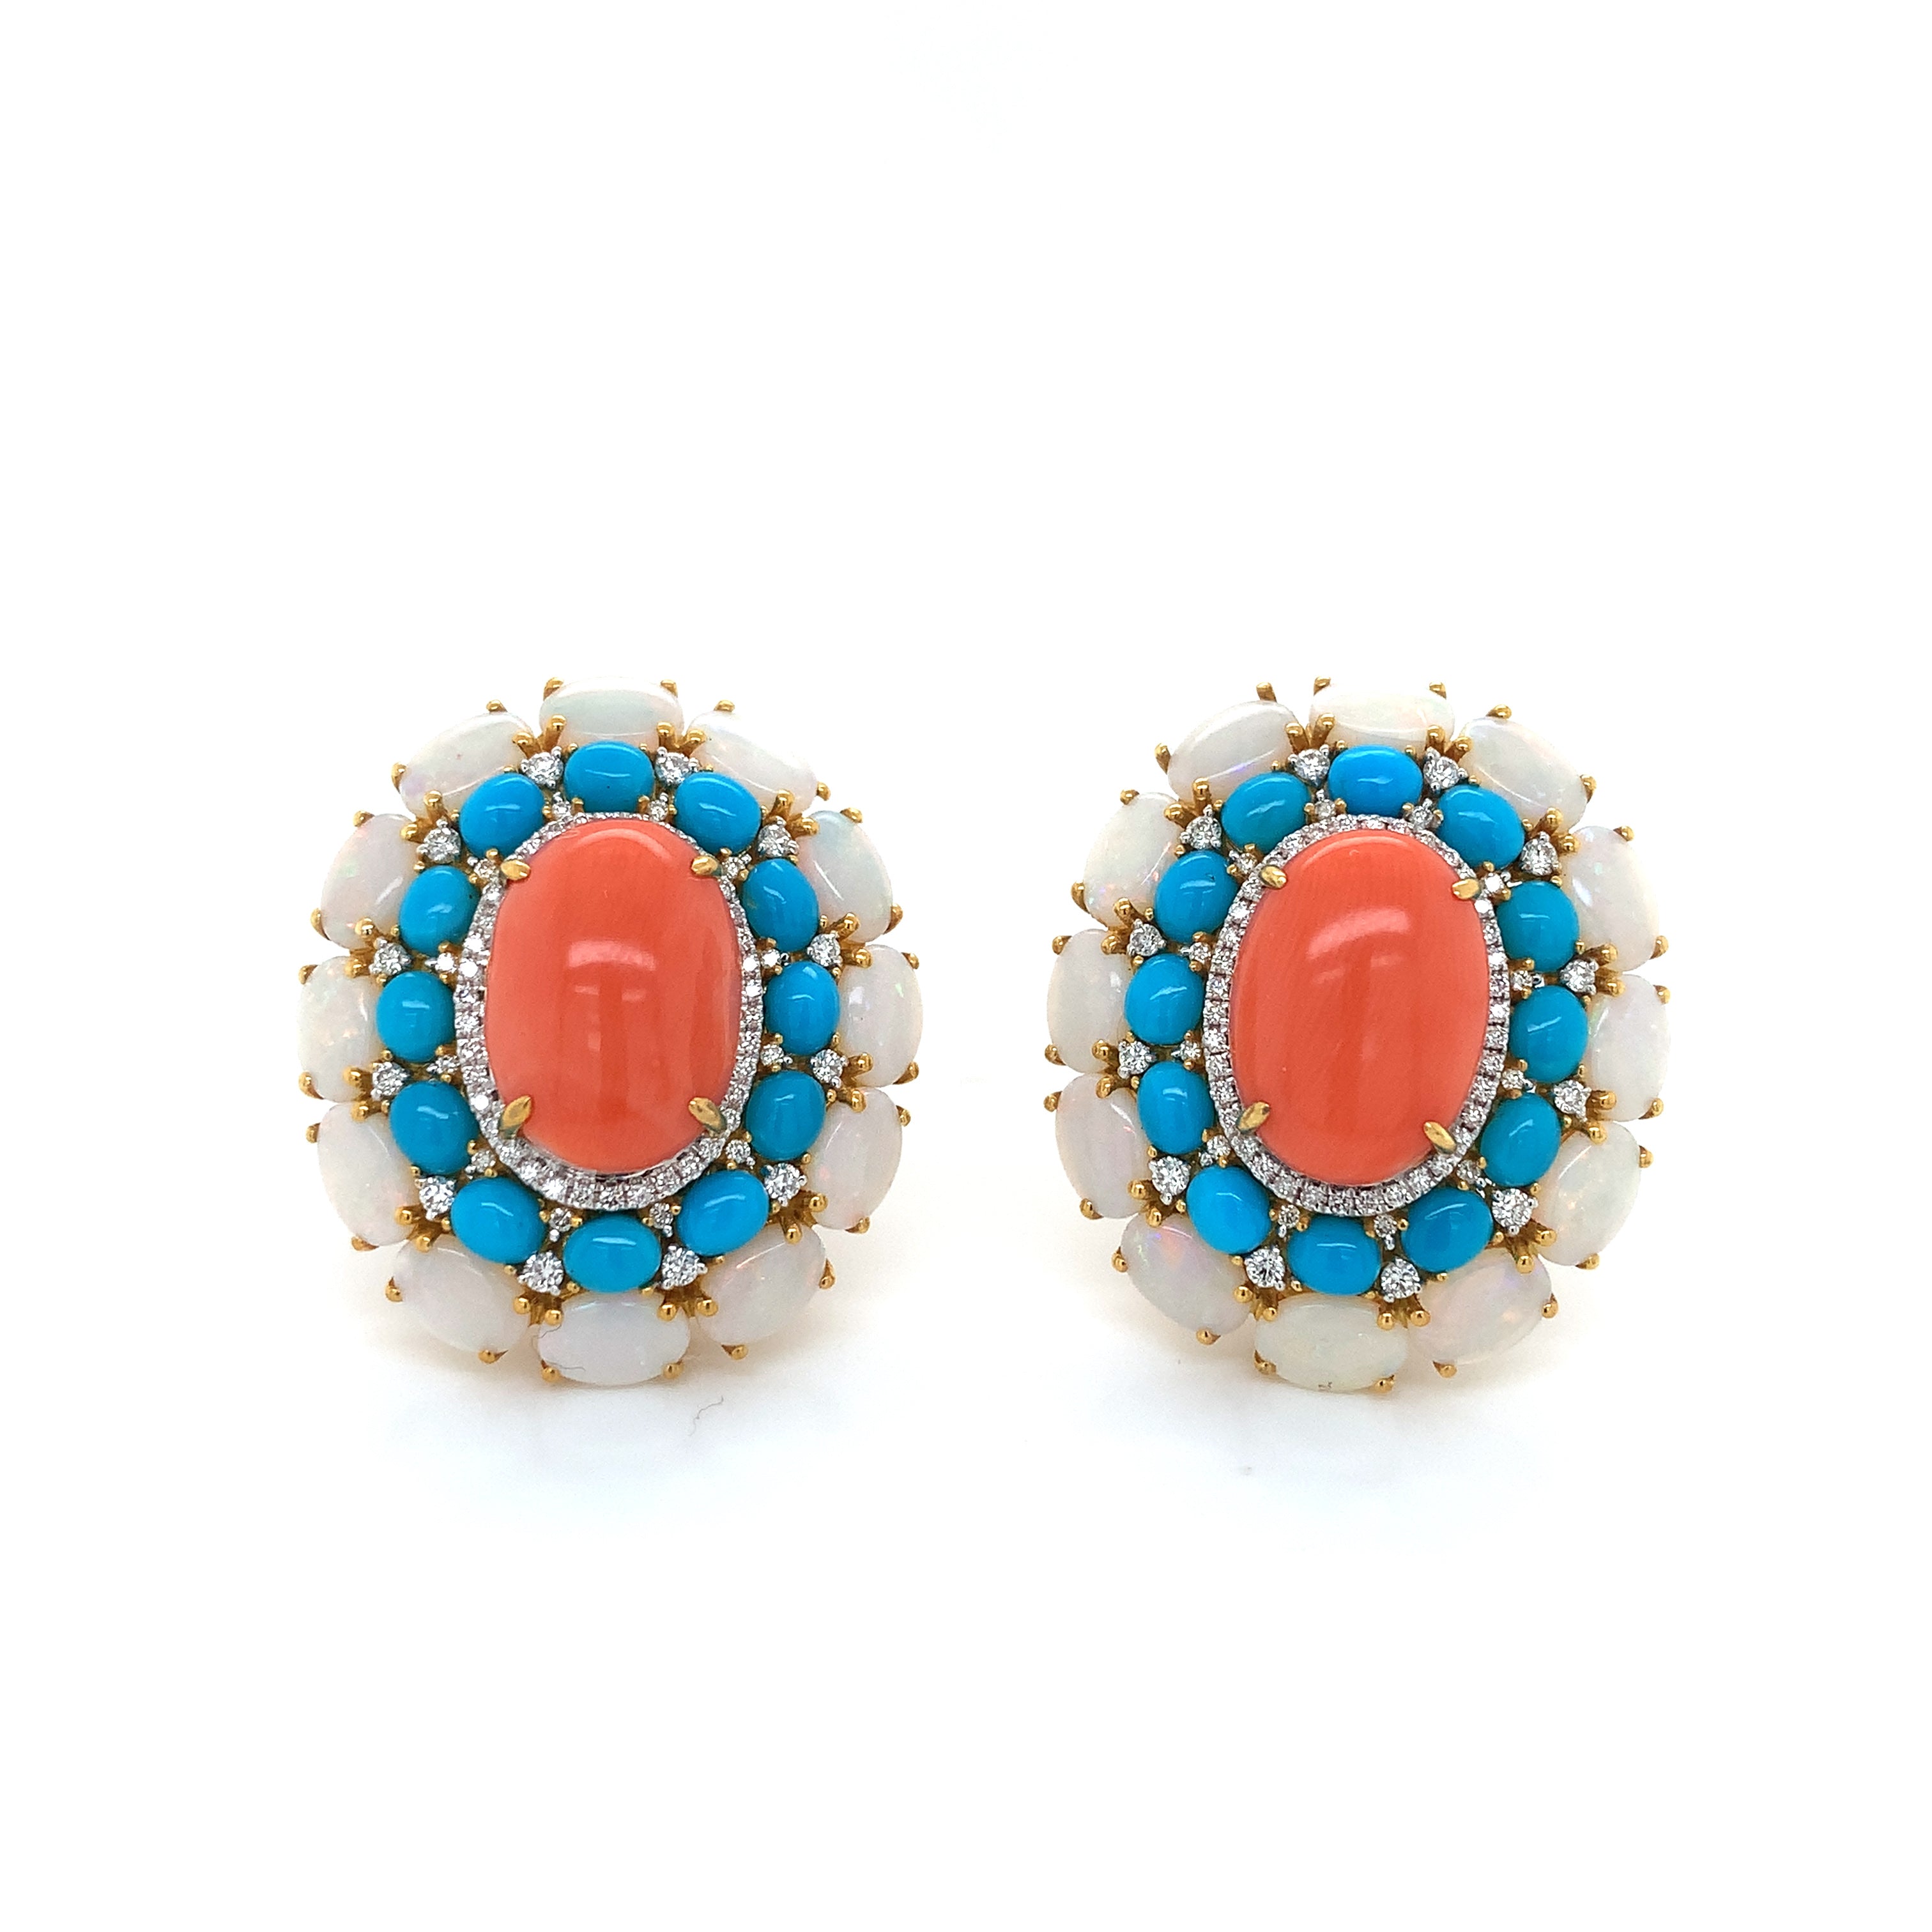 CORAL TURQUOISE EARRINGS